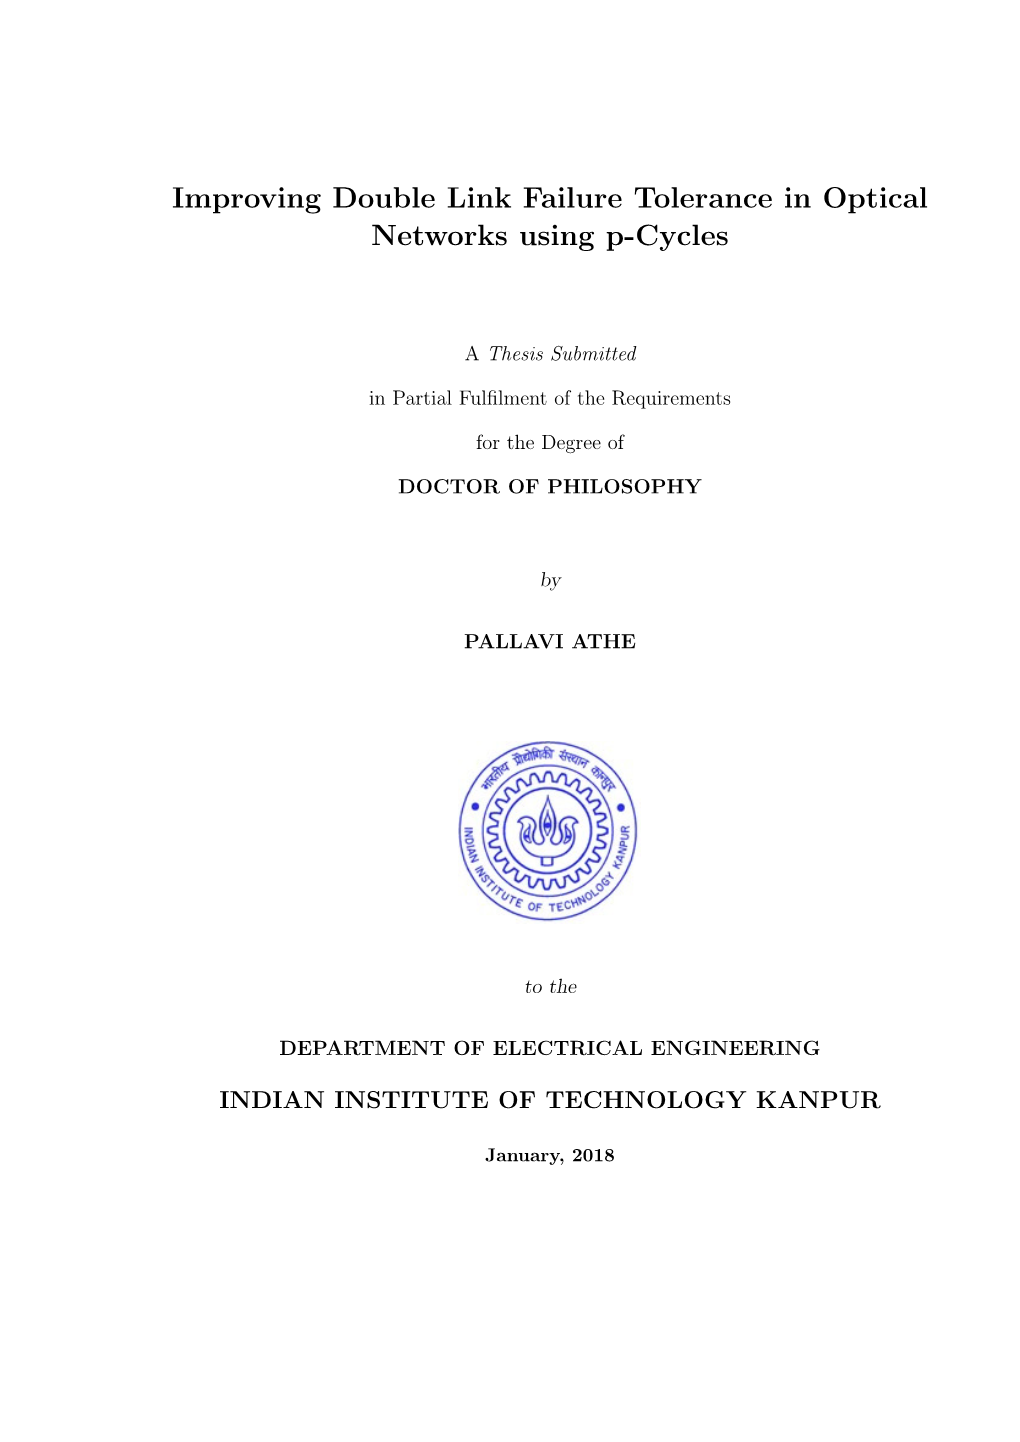 Improving Double Link Failure Tolerance in Optical Networks Using P-Cycles